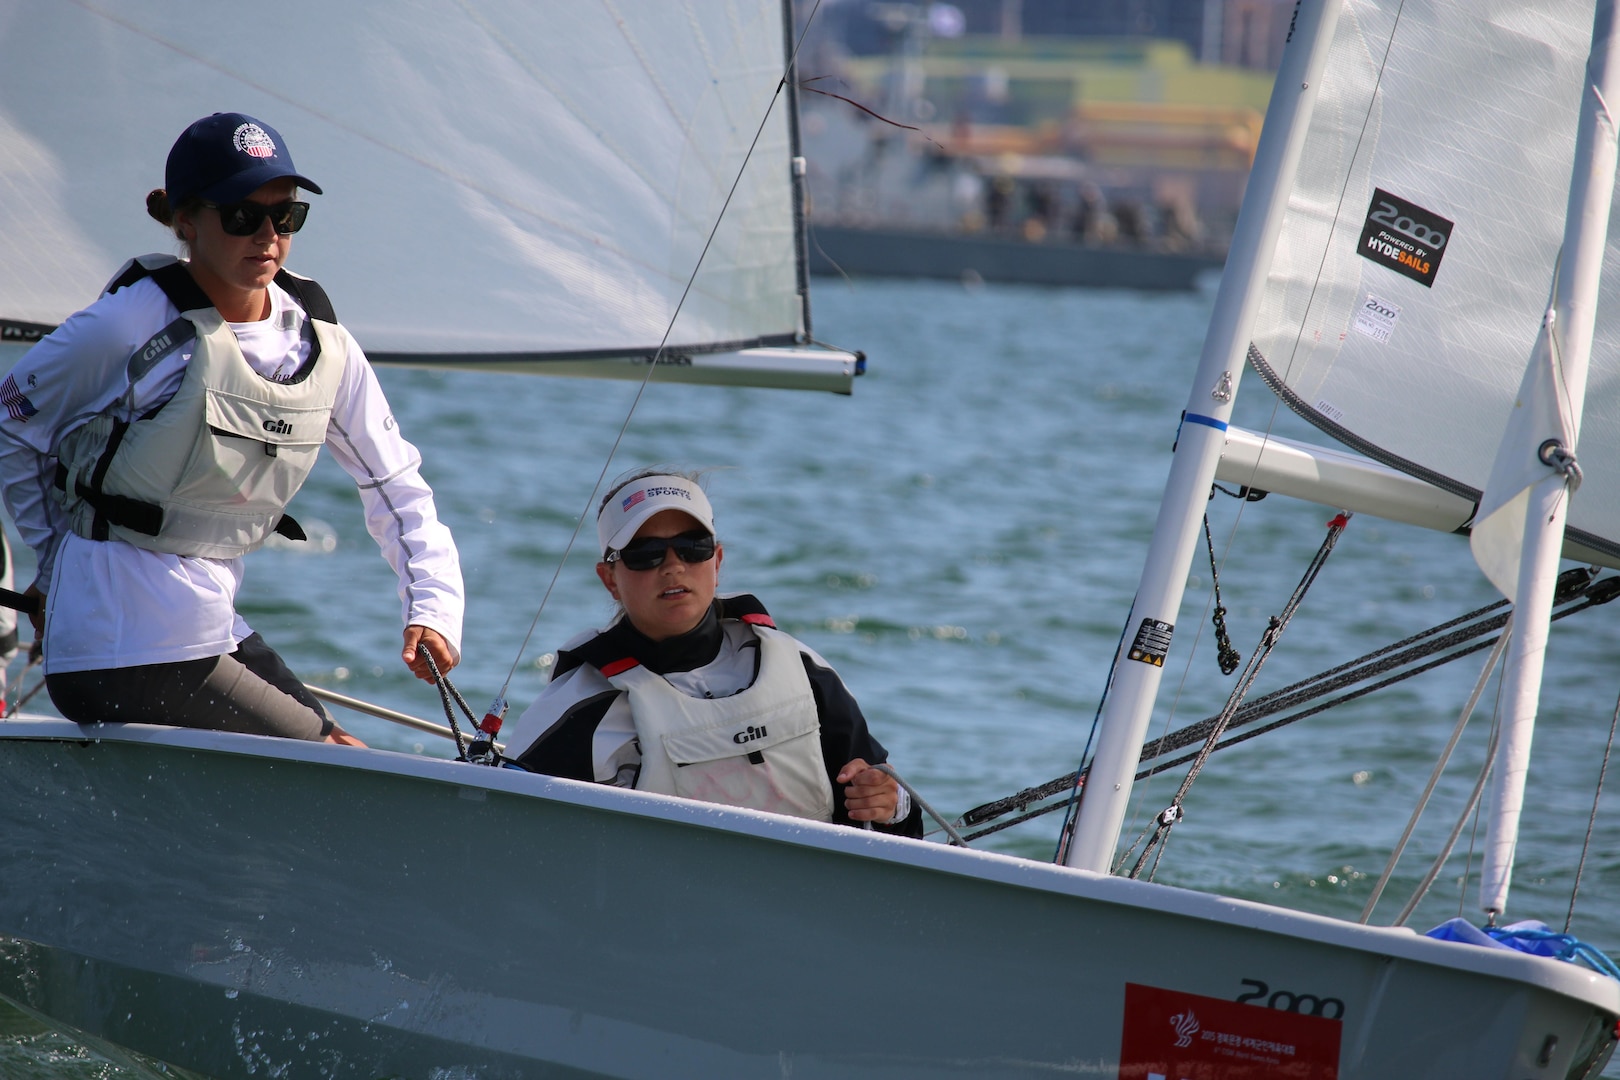 U.S. Women's Sailing team, with Navy Lt. Trisha Kutkiewicz (right) and Ensign Mary Hall (left) capture the gold medal in the 6th Conseil International du Sport Militaire (CISM), ouscoring Russia by one point for their first trip to the top of the podium since 2005. CISM Military World Games were held 2-11 October in Mungyeong, South Korea.